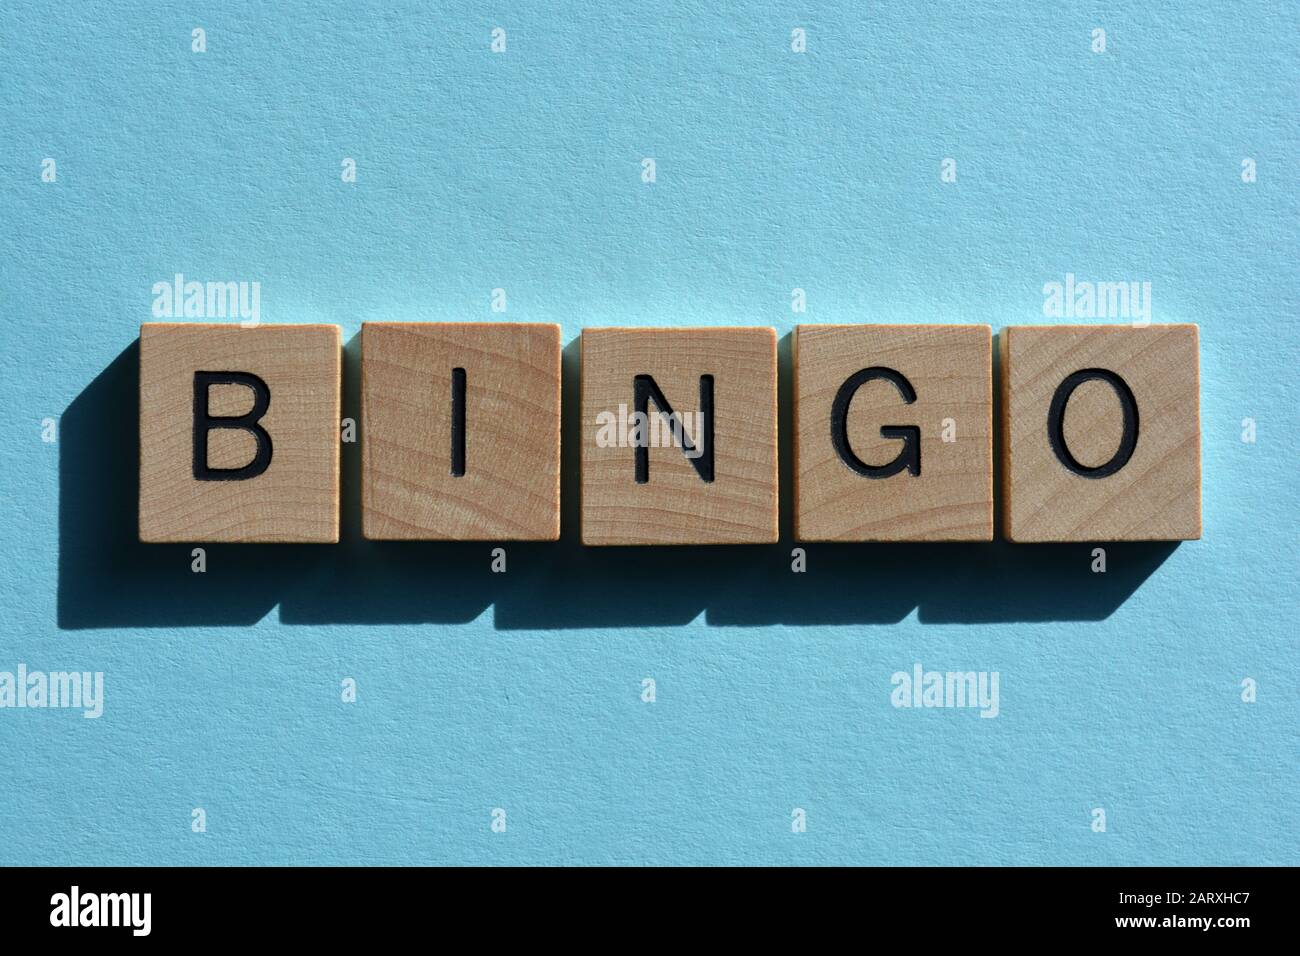 Bingo, word in 3d wooden alphabet letters on blue background with copy space Stock Photo